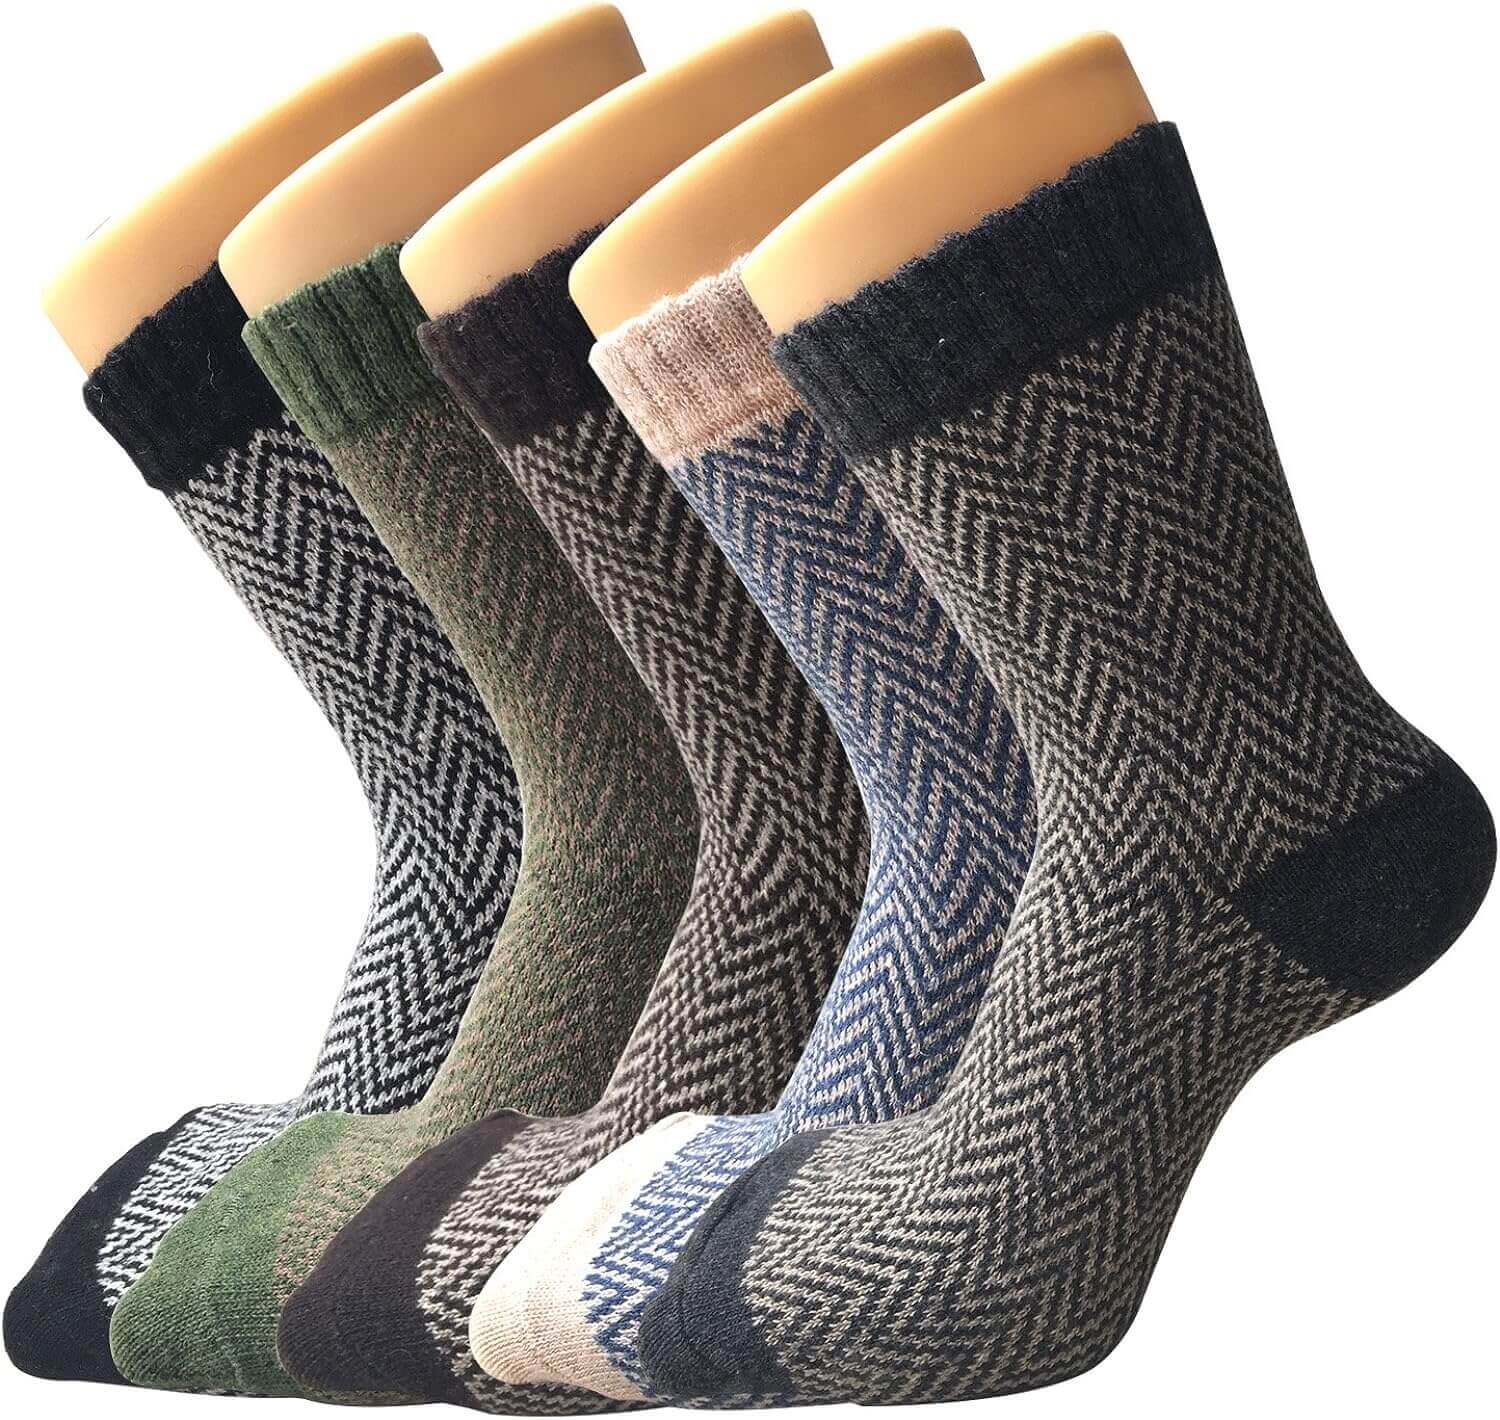 Shop The Latest >5 Pack Women's Thick Knit Wool Socks Winter Warm Socks > *Only $24.29*> From The Top Brand > *Senker Fashionl* > Shop Now and Get Free Shipping On Orders Over $45.00 >*Shop Earth Foot*